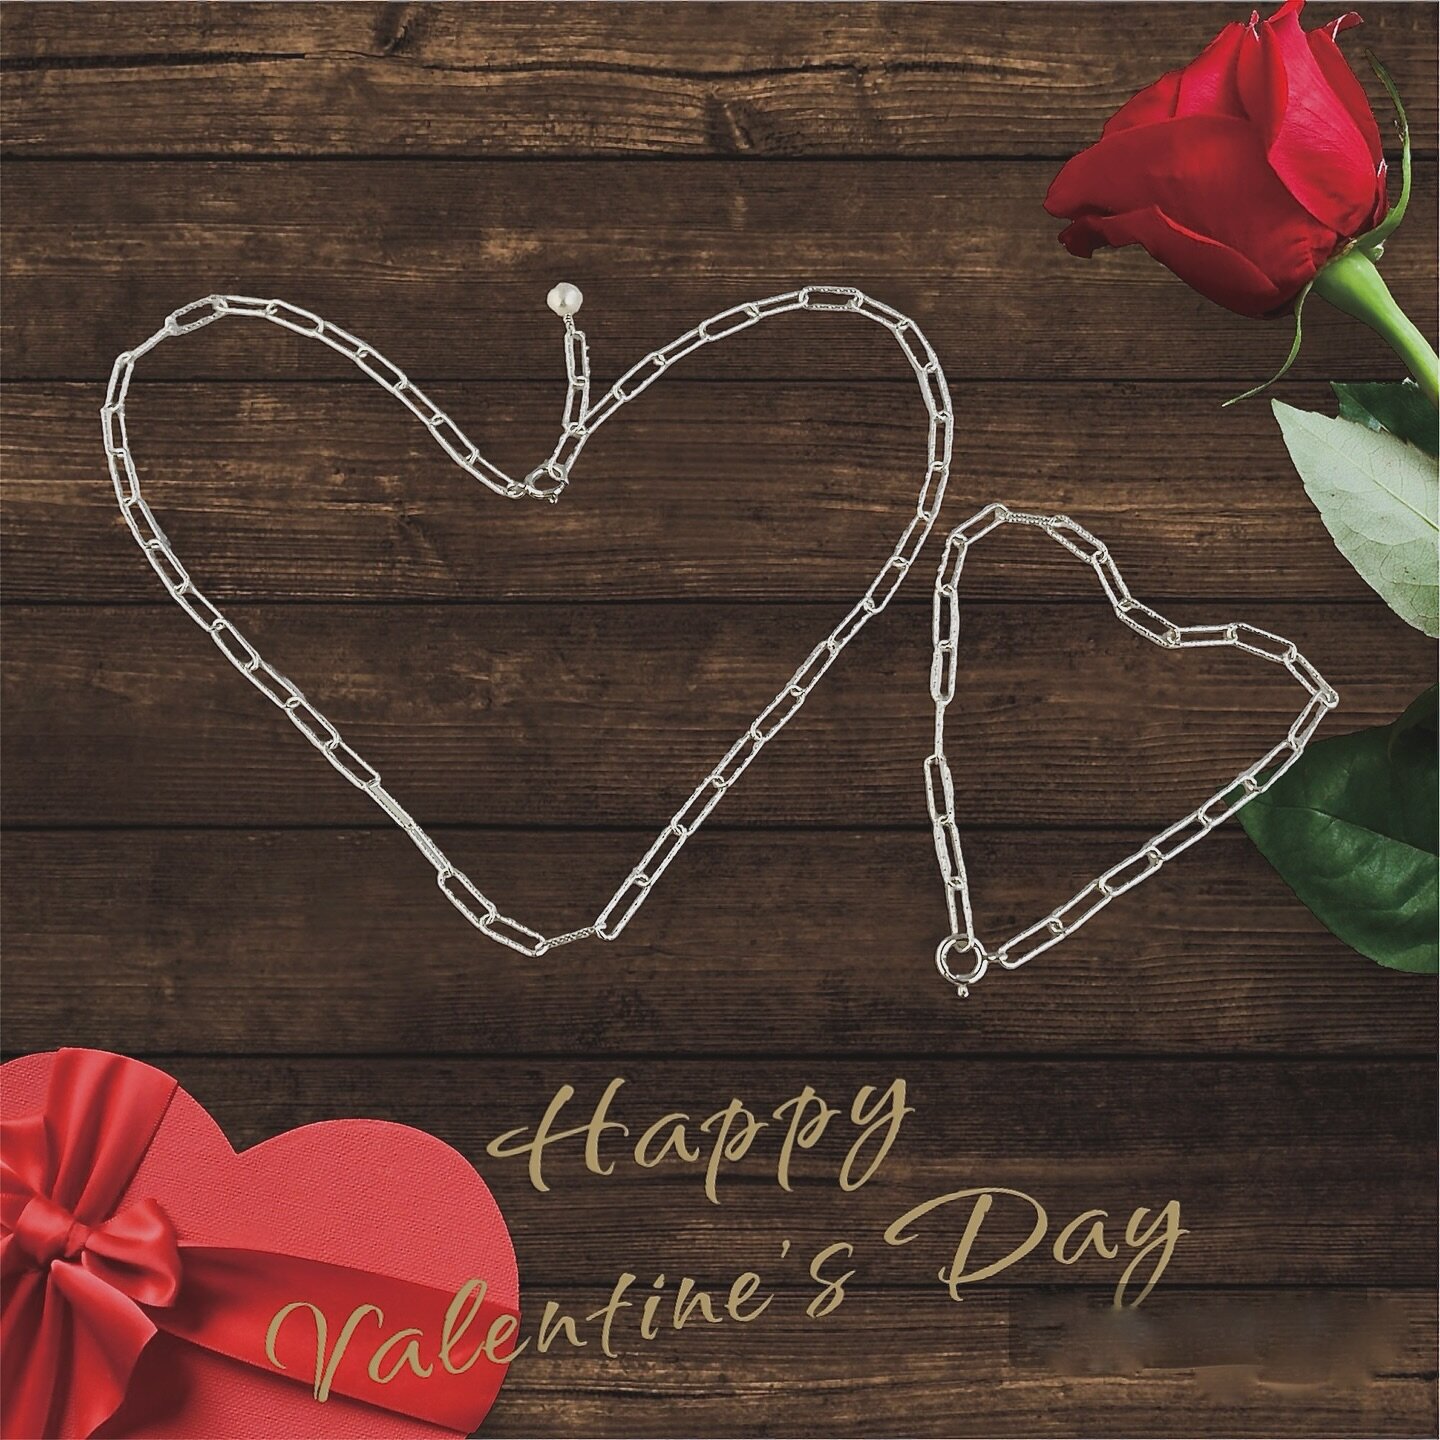 Happy Valentine&rsquo;s Day beautiful souls out there! 🫶

May your day be filled with love and lots of hugs from your family, friends, and loved ones! 💘💝💕

And maybe a little meaningful bling! 😘

#happyvalentinesday #valentines #heartjewelry #il